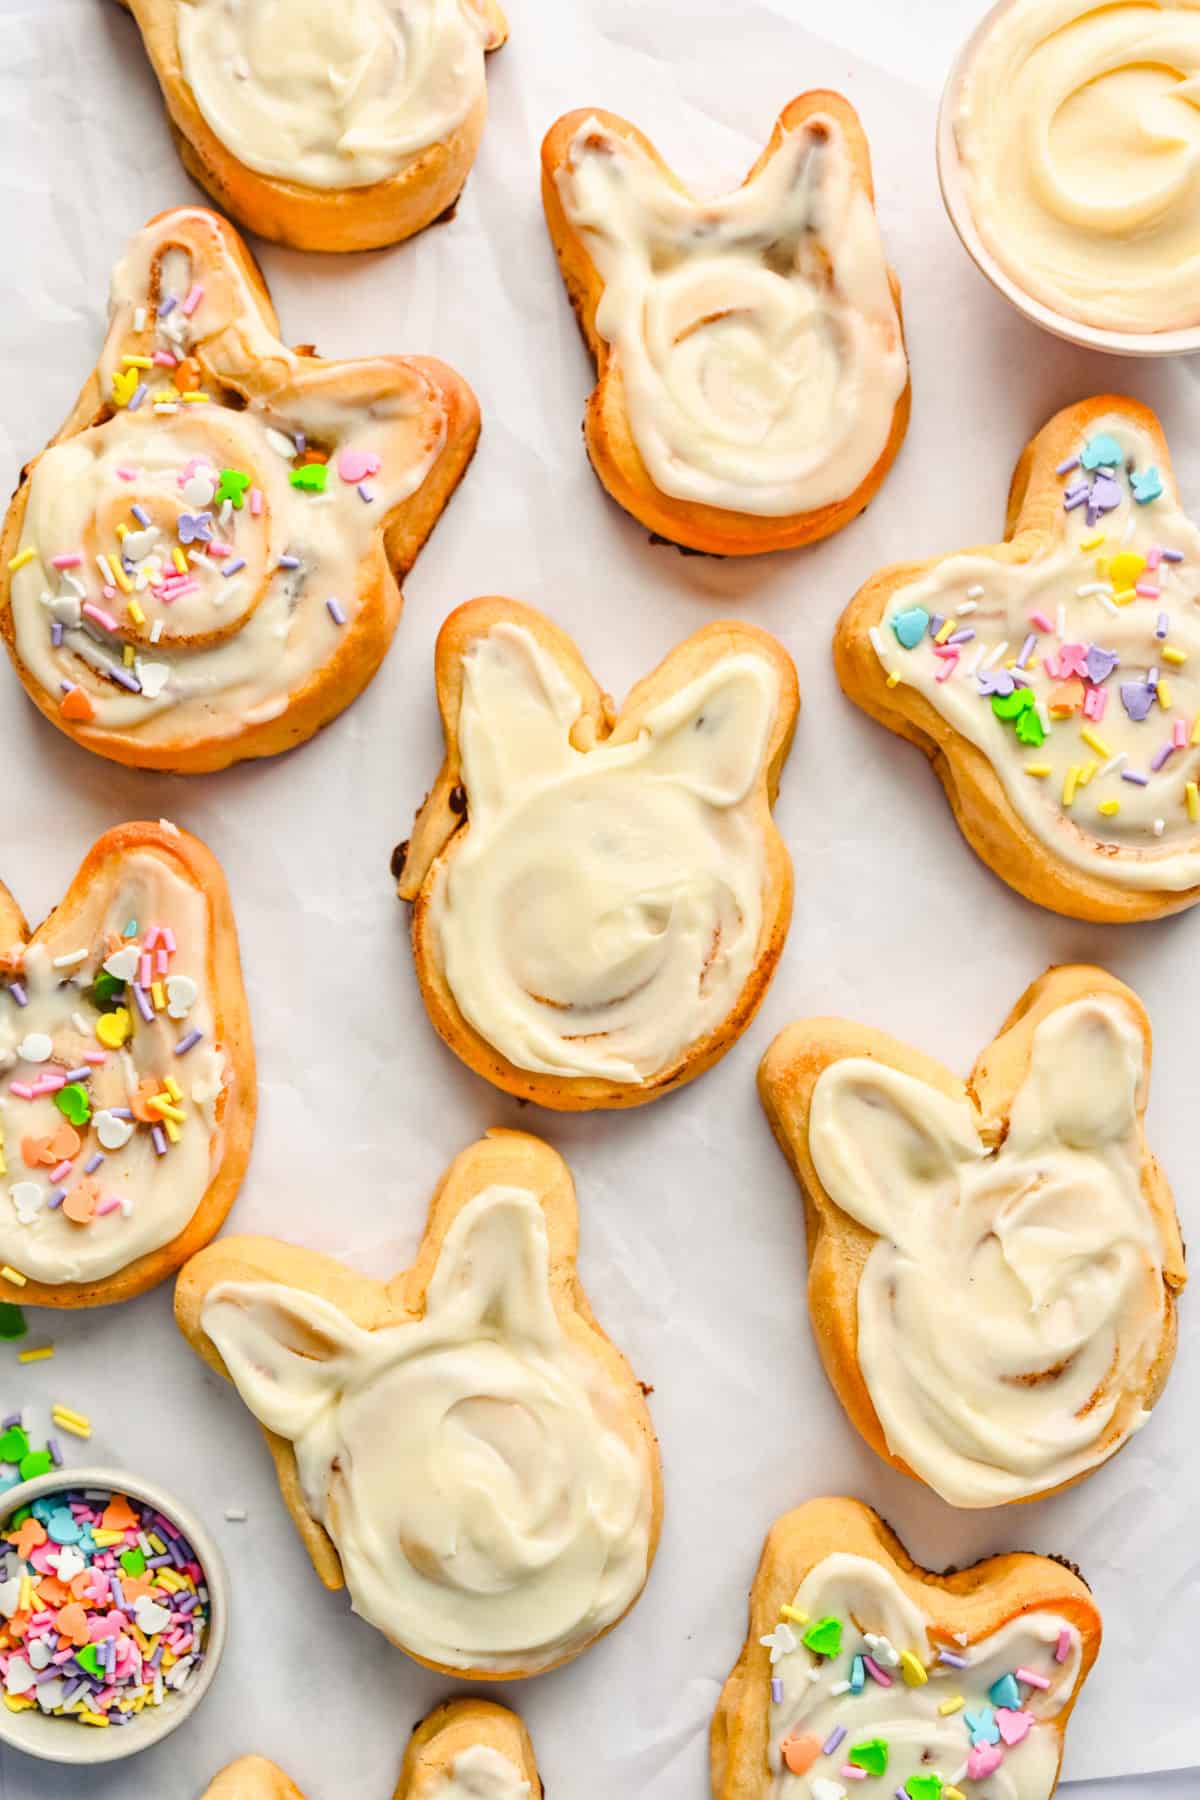 Bunny cinnamon rolls next to a dish of Easter sprinkles.